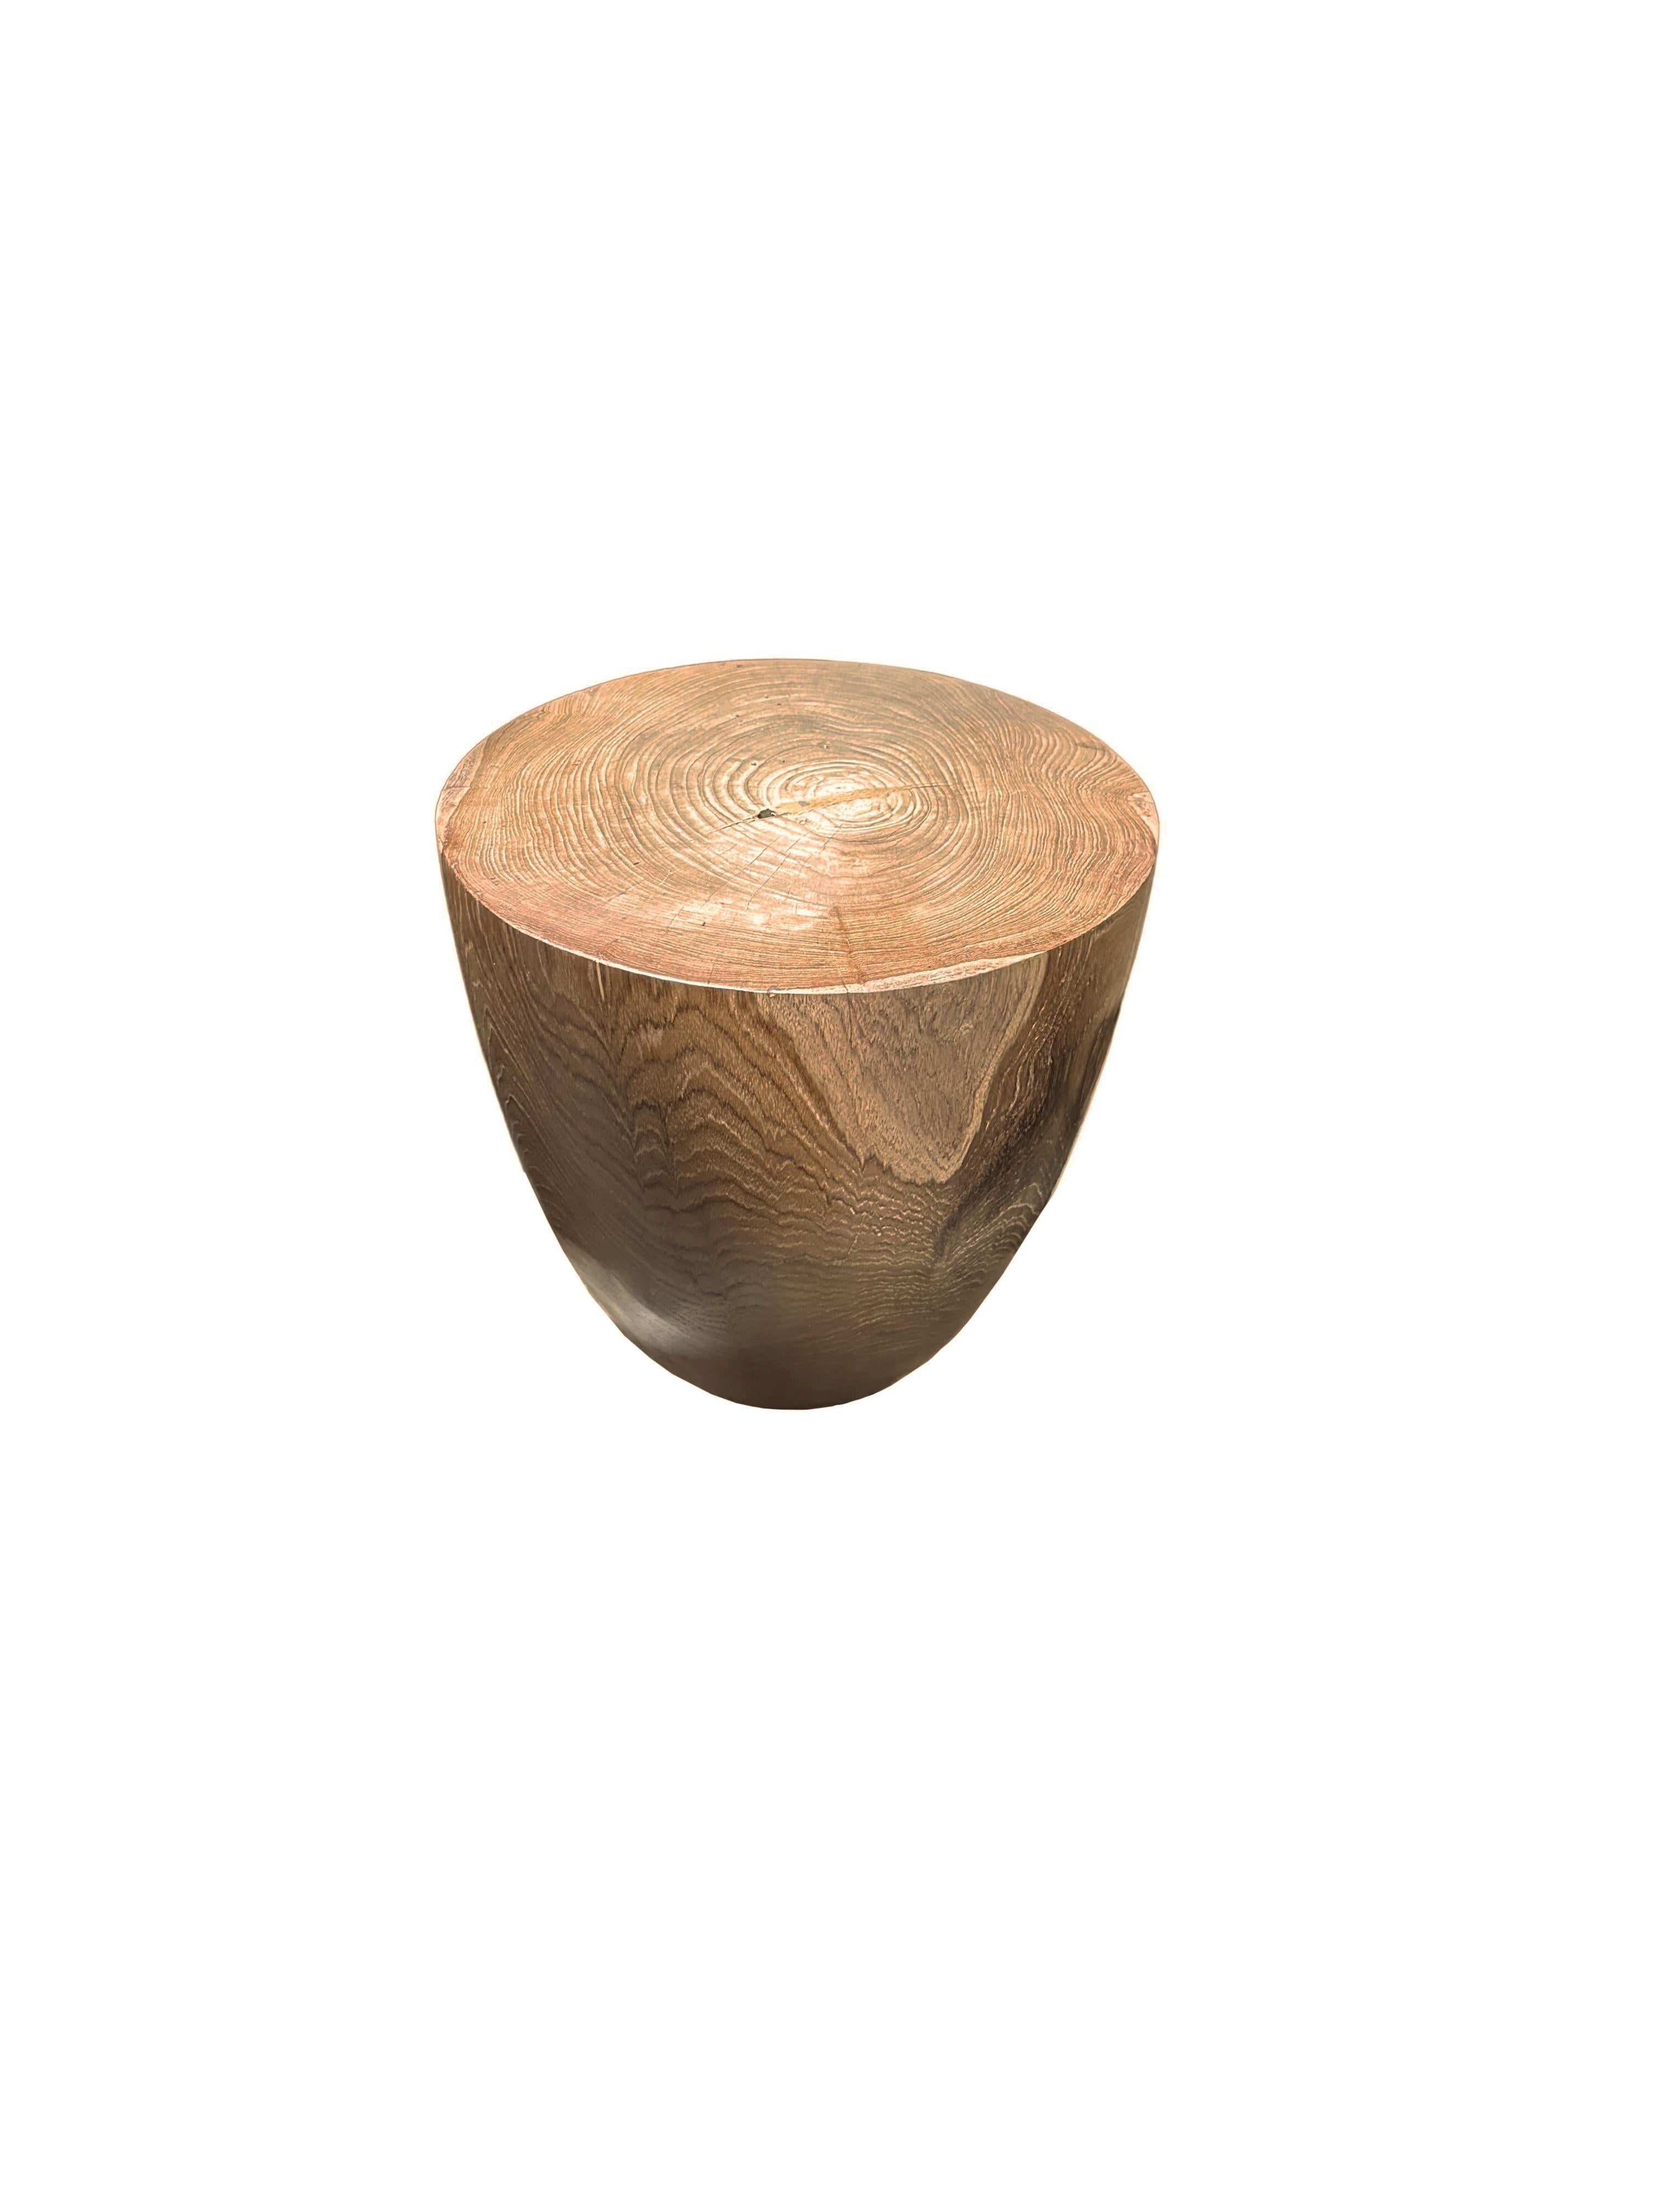 Organic Modern Sculptural Teak Wood Side Table, with Stunning Wood Textures, Modern Organic For Sale